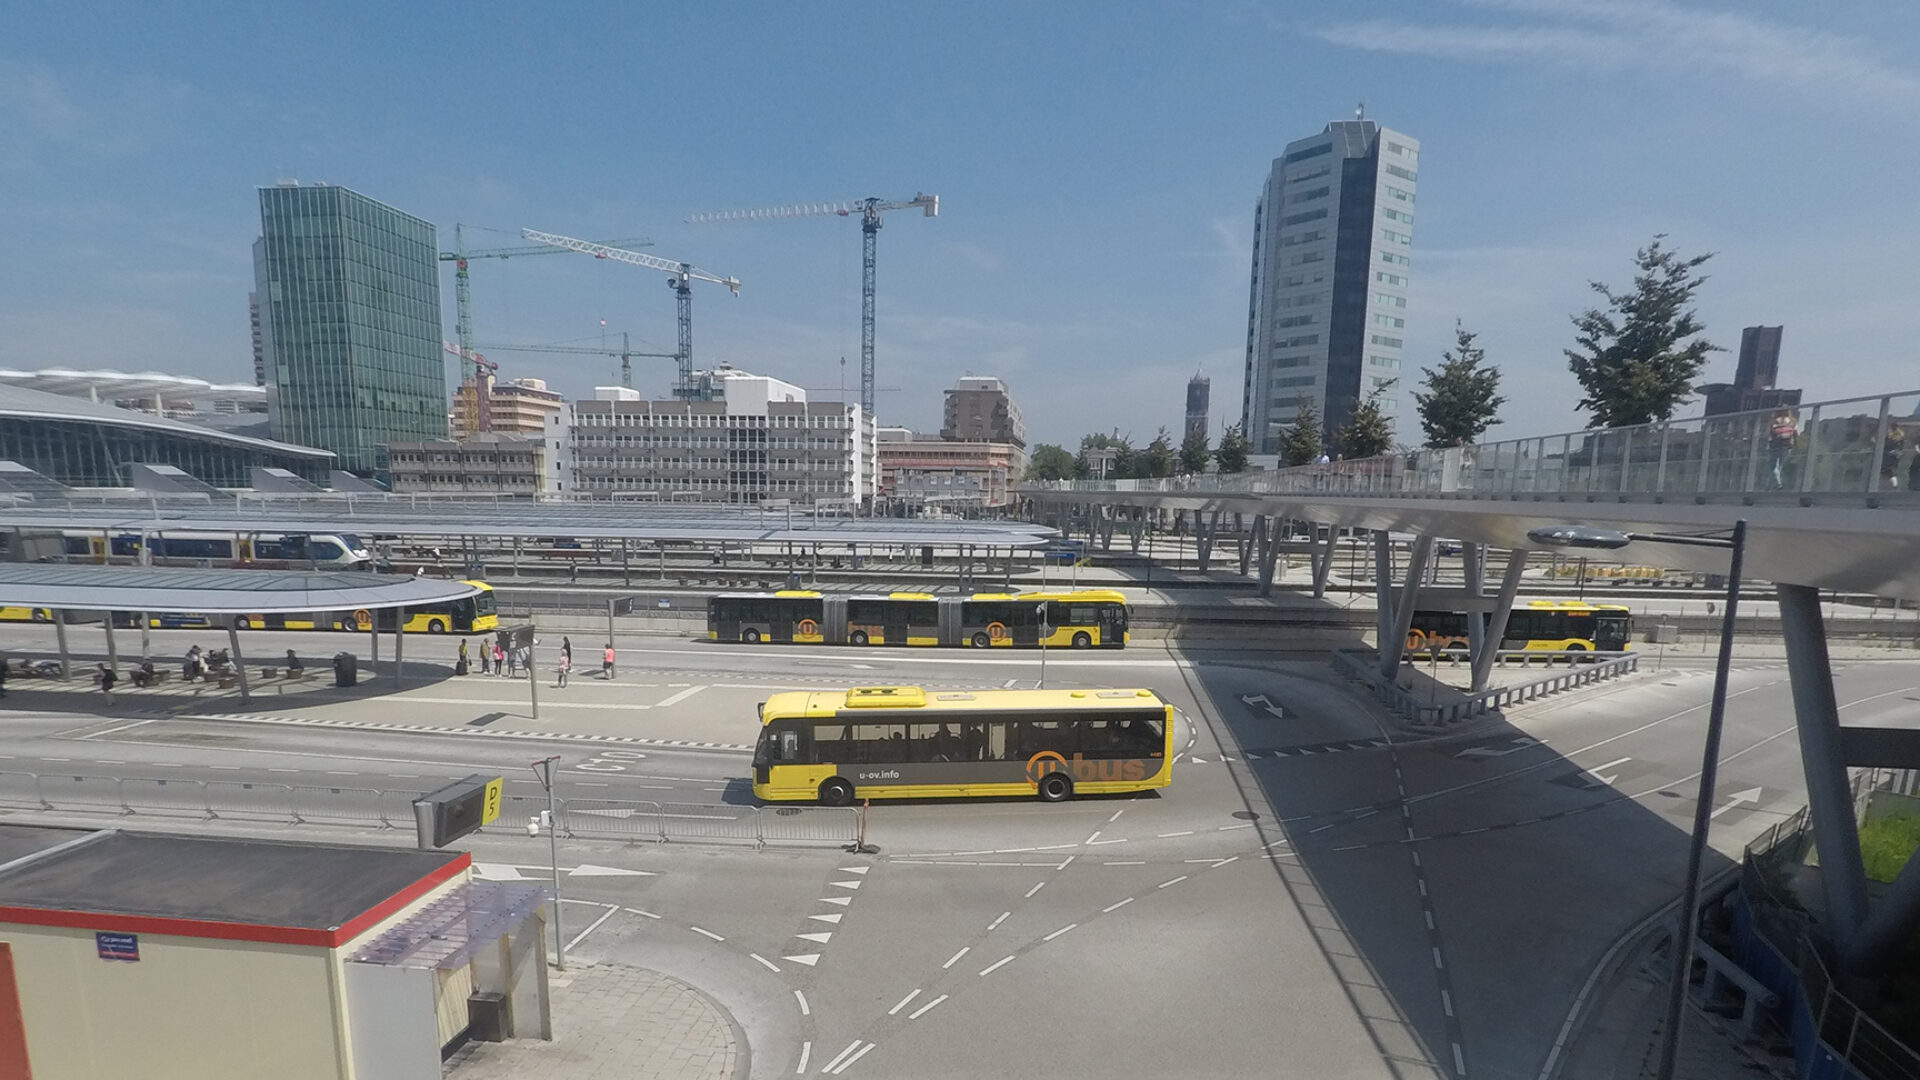 As easy as A to ZEB? Finding the path to zero emission buses on the way to net-zero 2050